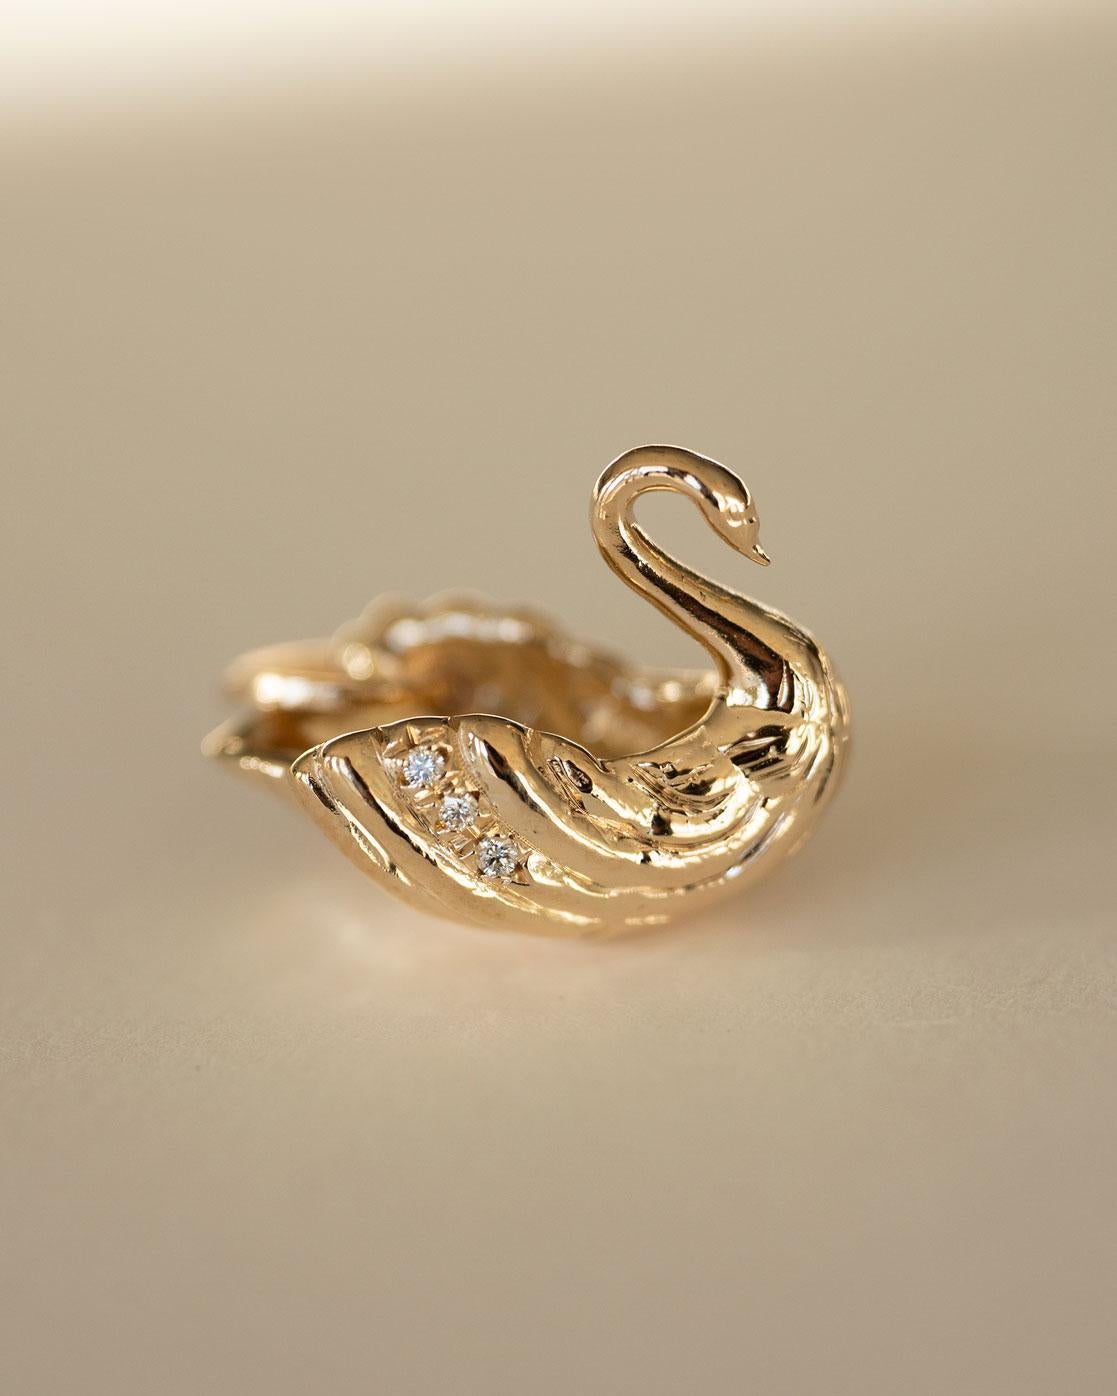 An ode to the northern constellation on the plane of the milky way. Swan pendant is adorned with diamonds and beautifully hand detailed.

A symbol of love, elegance and beauty. 

✧ 14K Solid Yellow Gold
✧ 1mm Brilliant Cut Diamonds
✧ Swan Measures